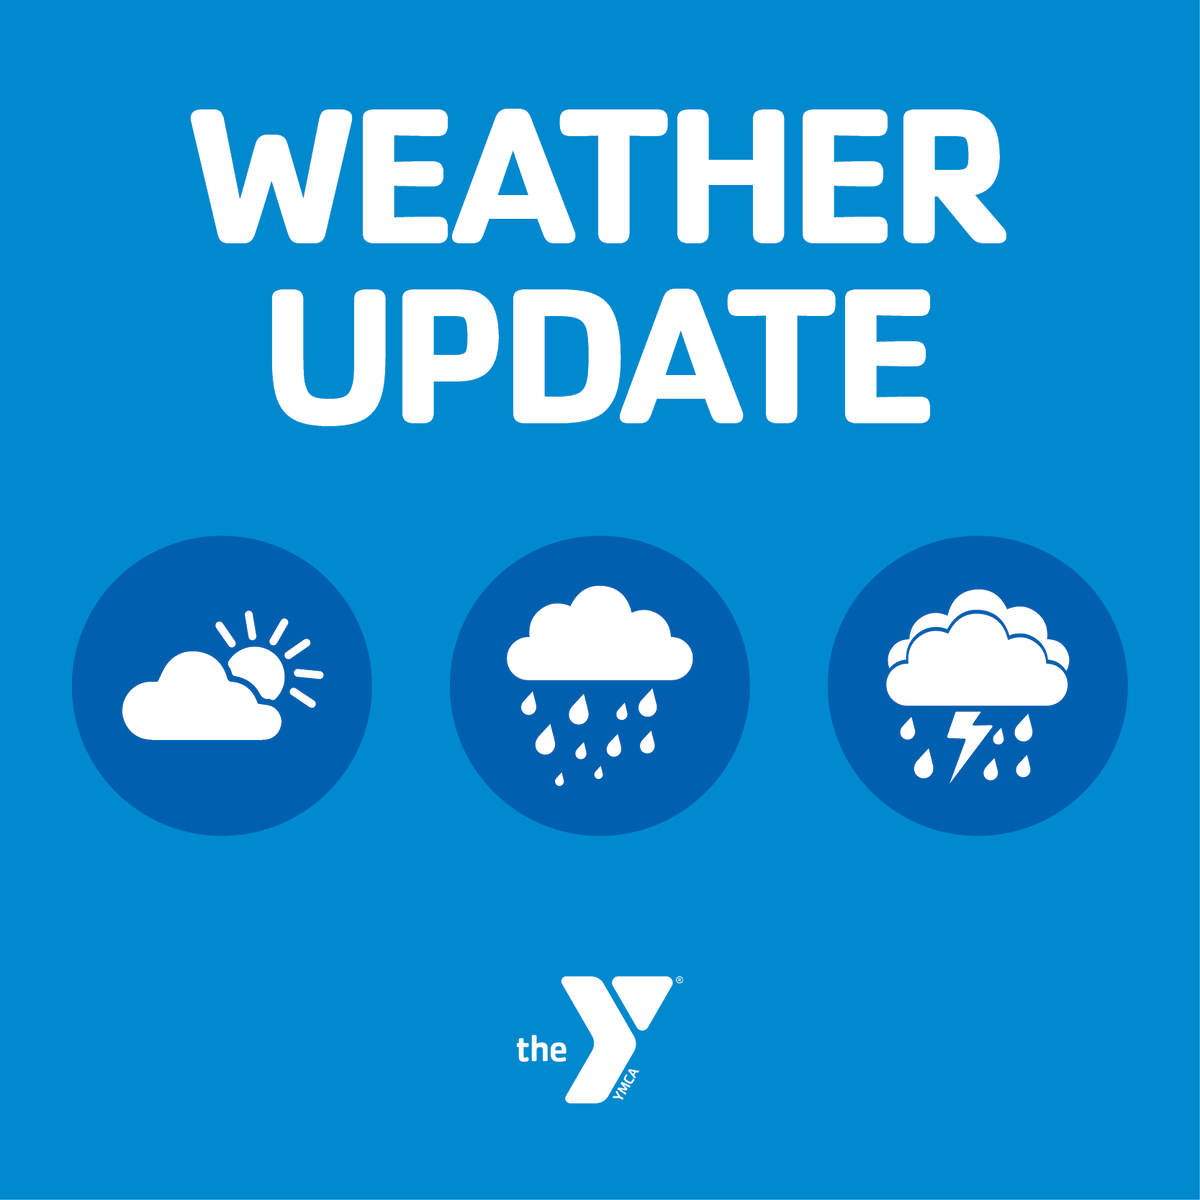 Due to the weather, our facilities are closing early at 2 pm (1 pm Marin). Stay up-to-date with branch hours on our website. Refer to the branch-specific page for the most up-to-date weather-related impacts at our facilities. ymcasf.org/locations #ymcasf #ysf